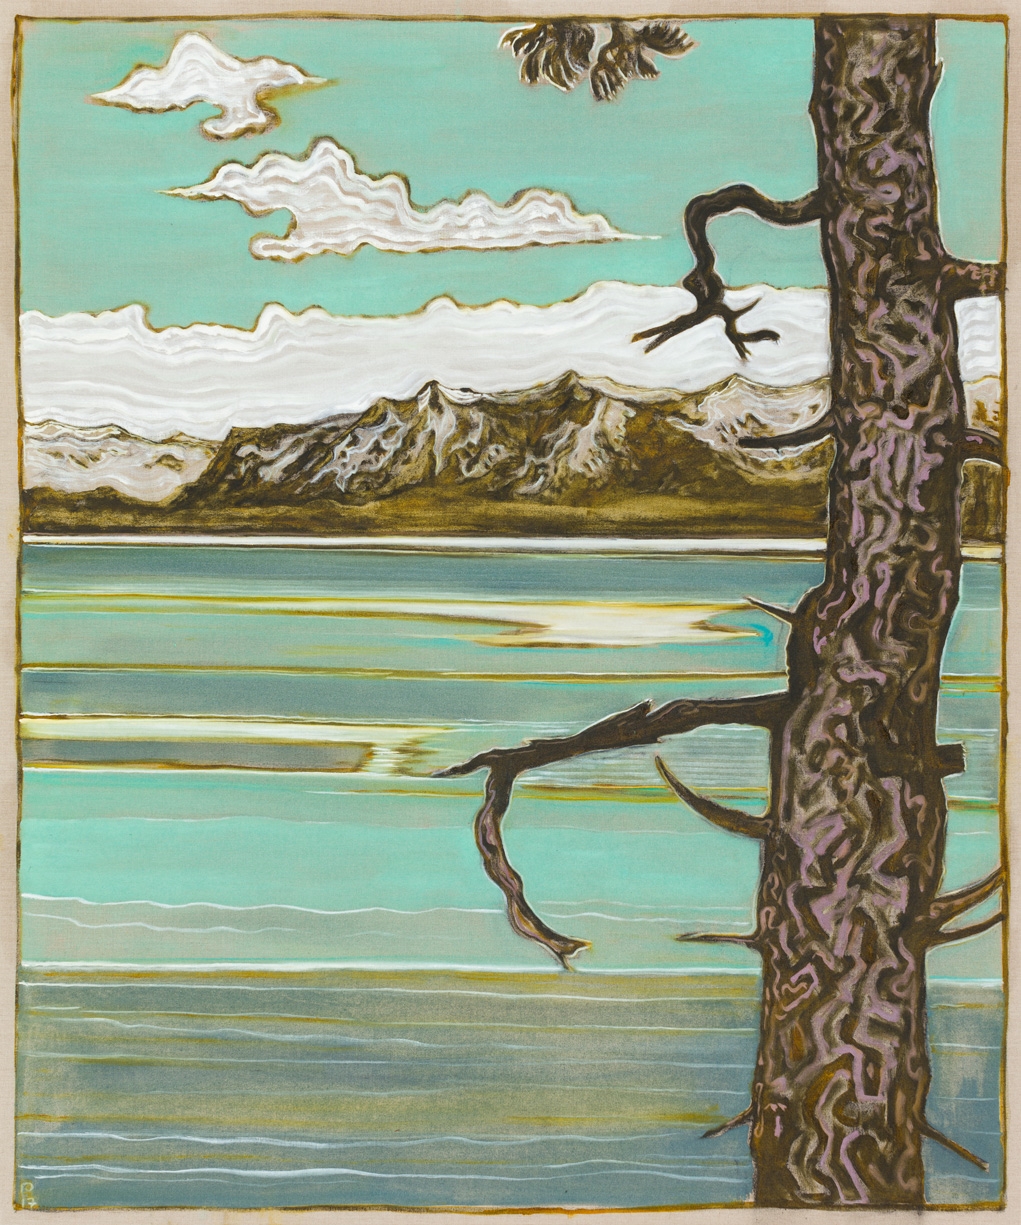 BILLY CHILDISH, pine and mountains, 2017